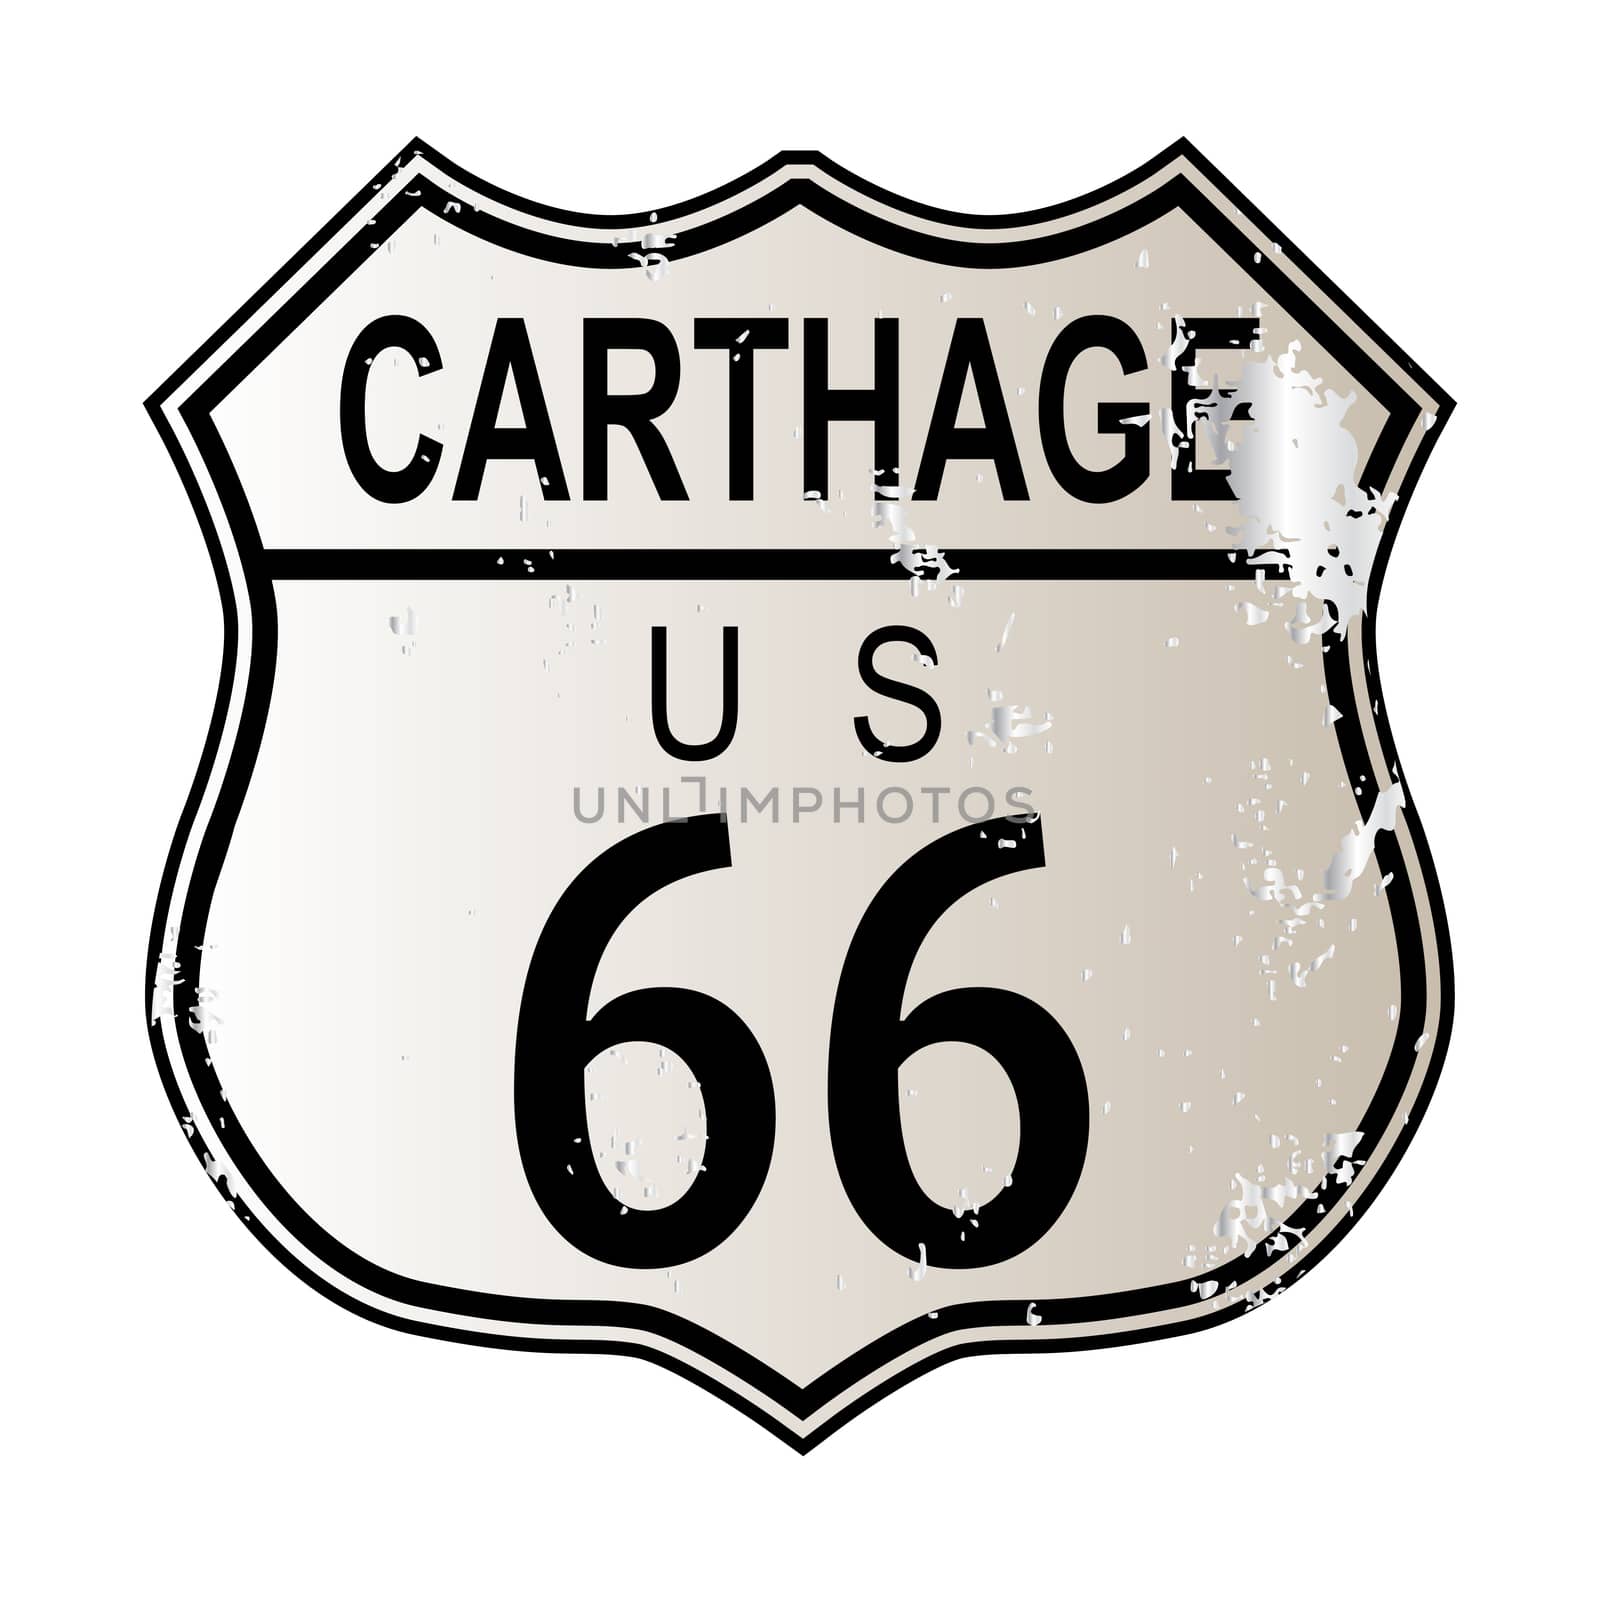 Carthage Route 66 traffic sign over a white background and the legend ROUTE US 66